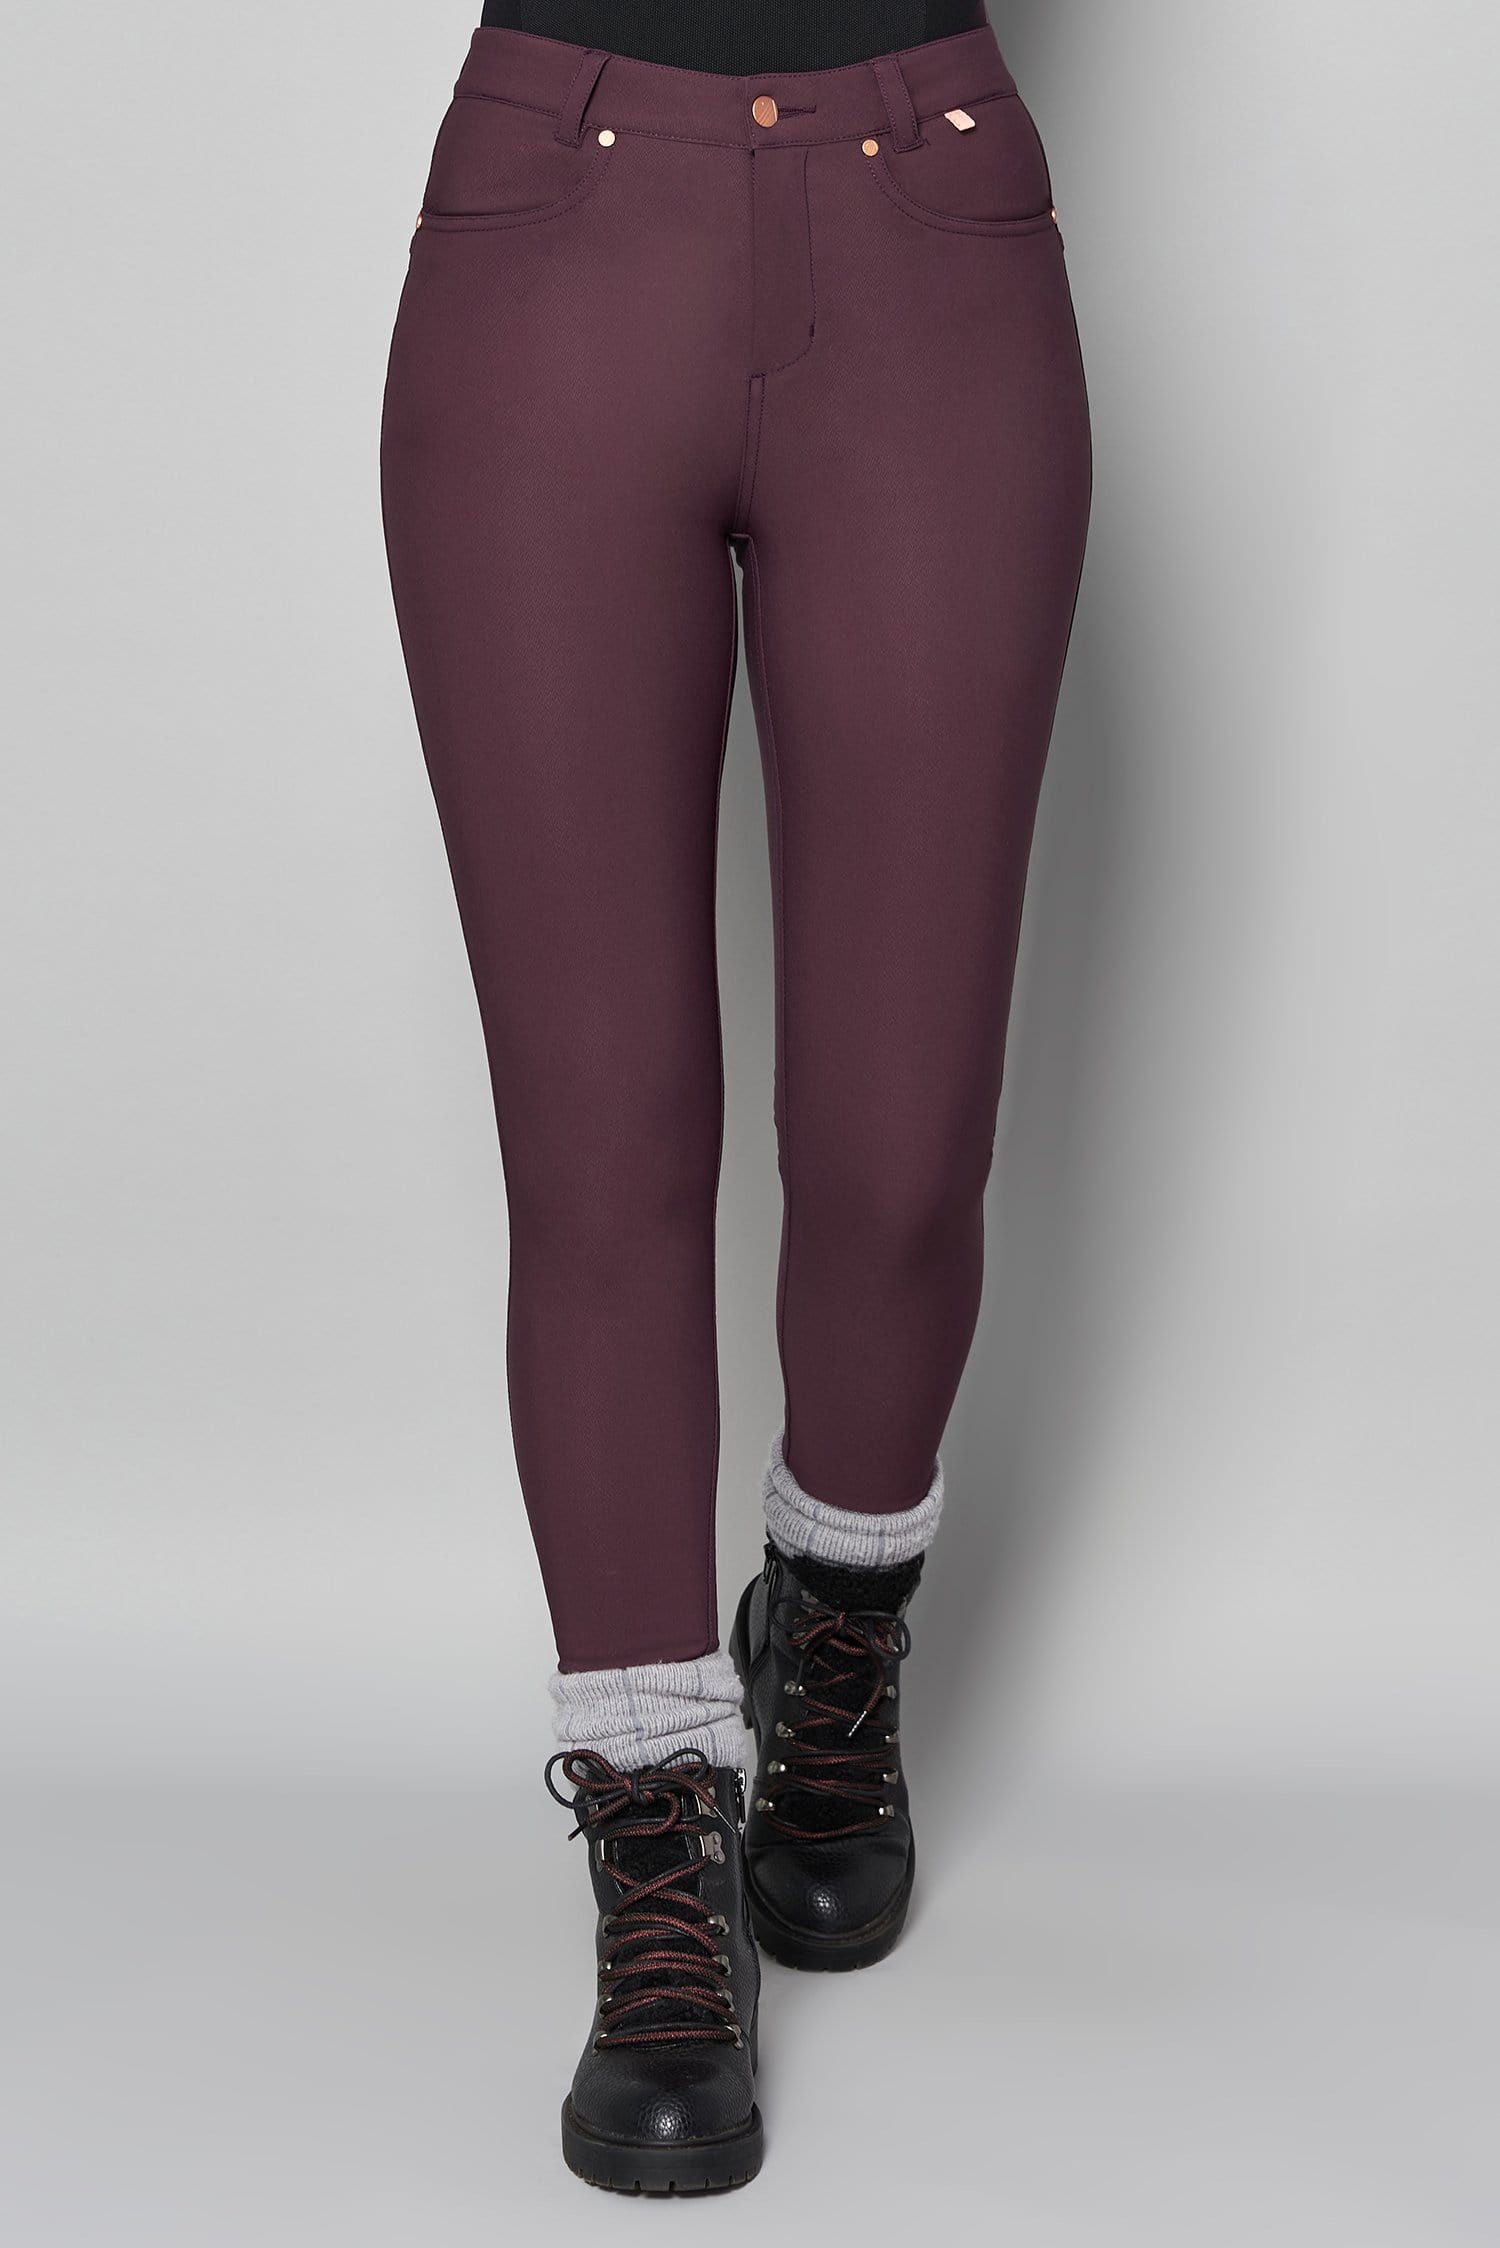 Thermal Skinny Outdoor Trousers - Aubergine - 24r / Uk6 - Womens - Acai Outdoorwear